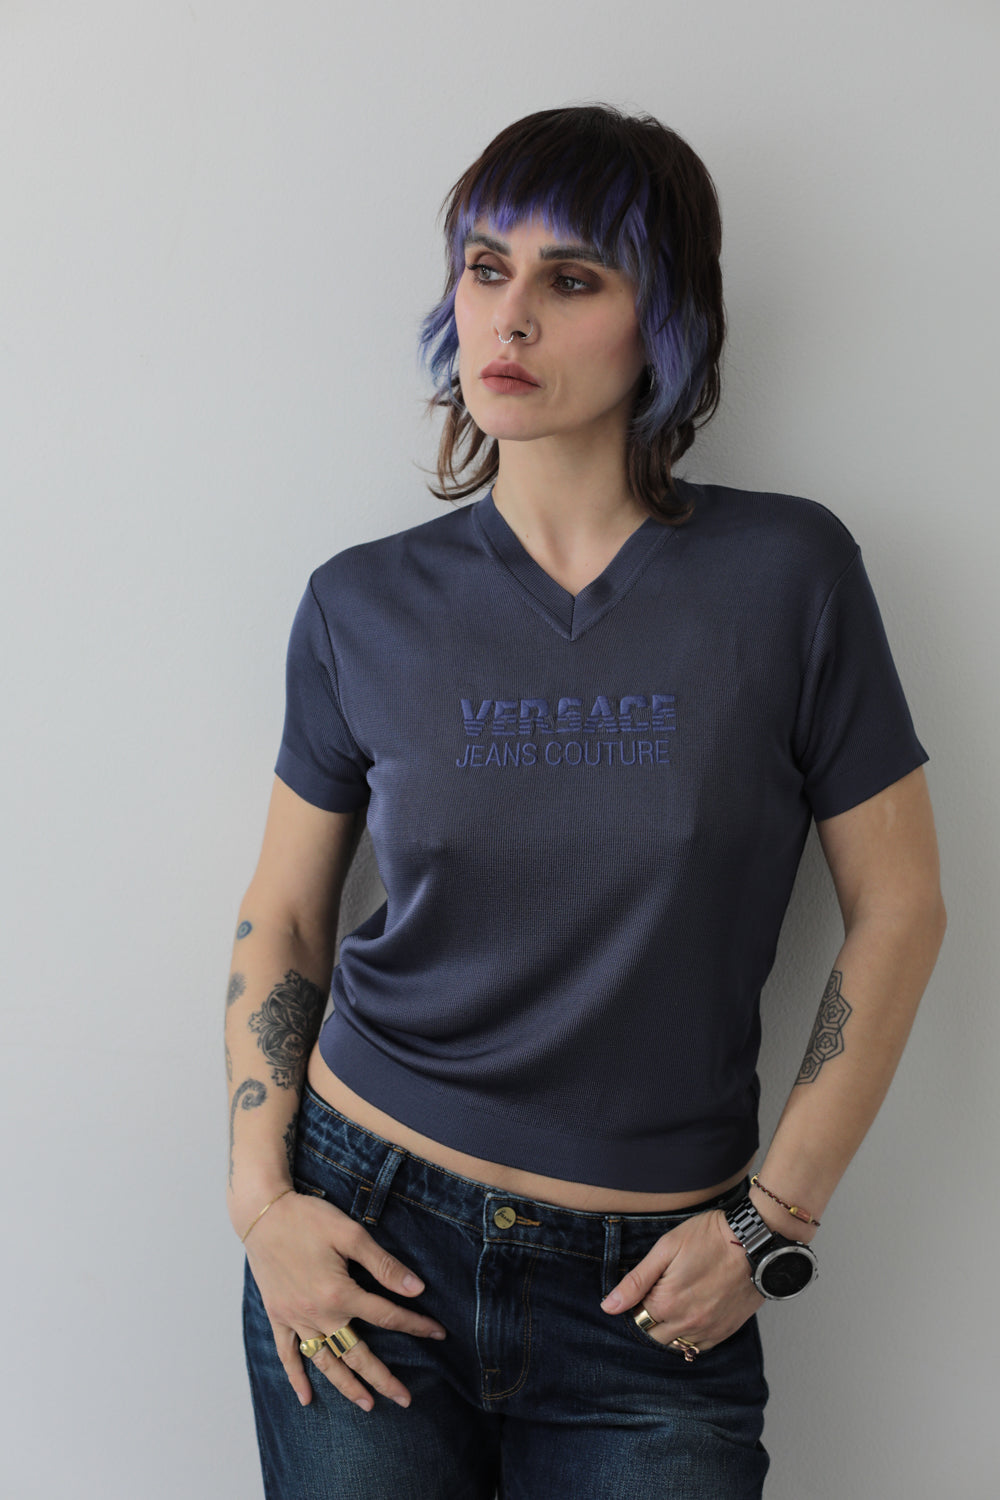 Versace Jeans Couture Viscose 90s Vintage Rayon Tee